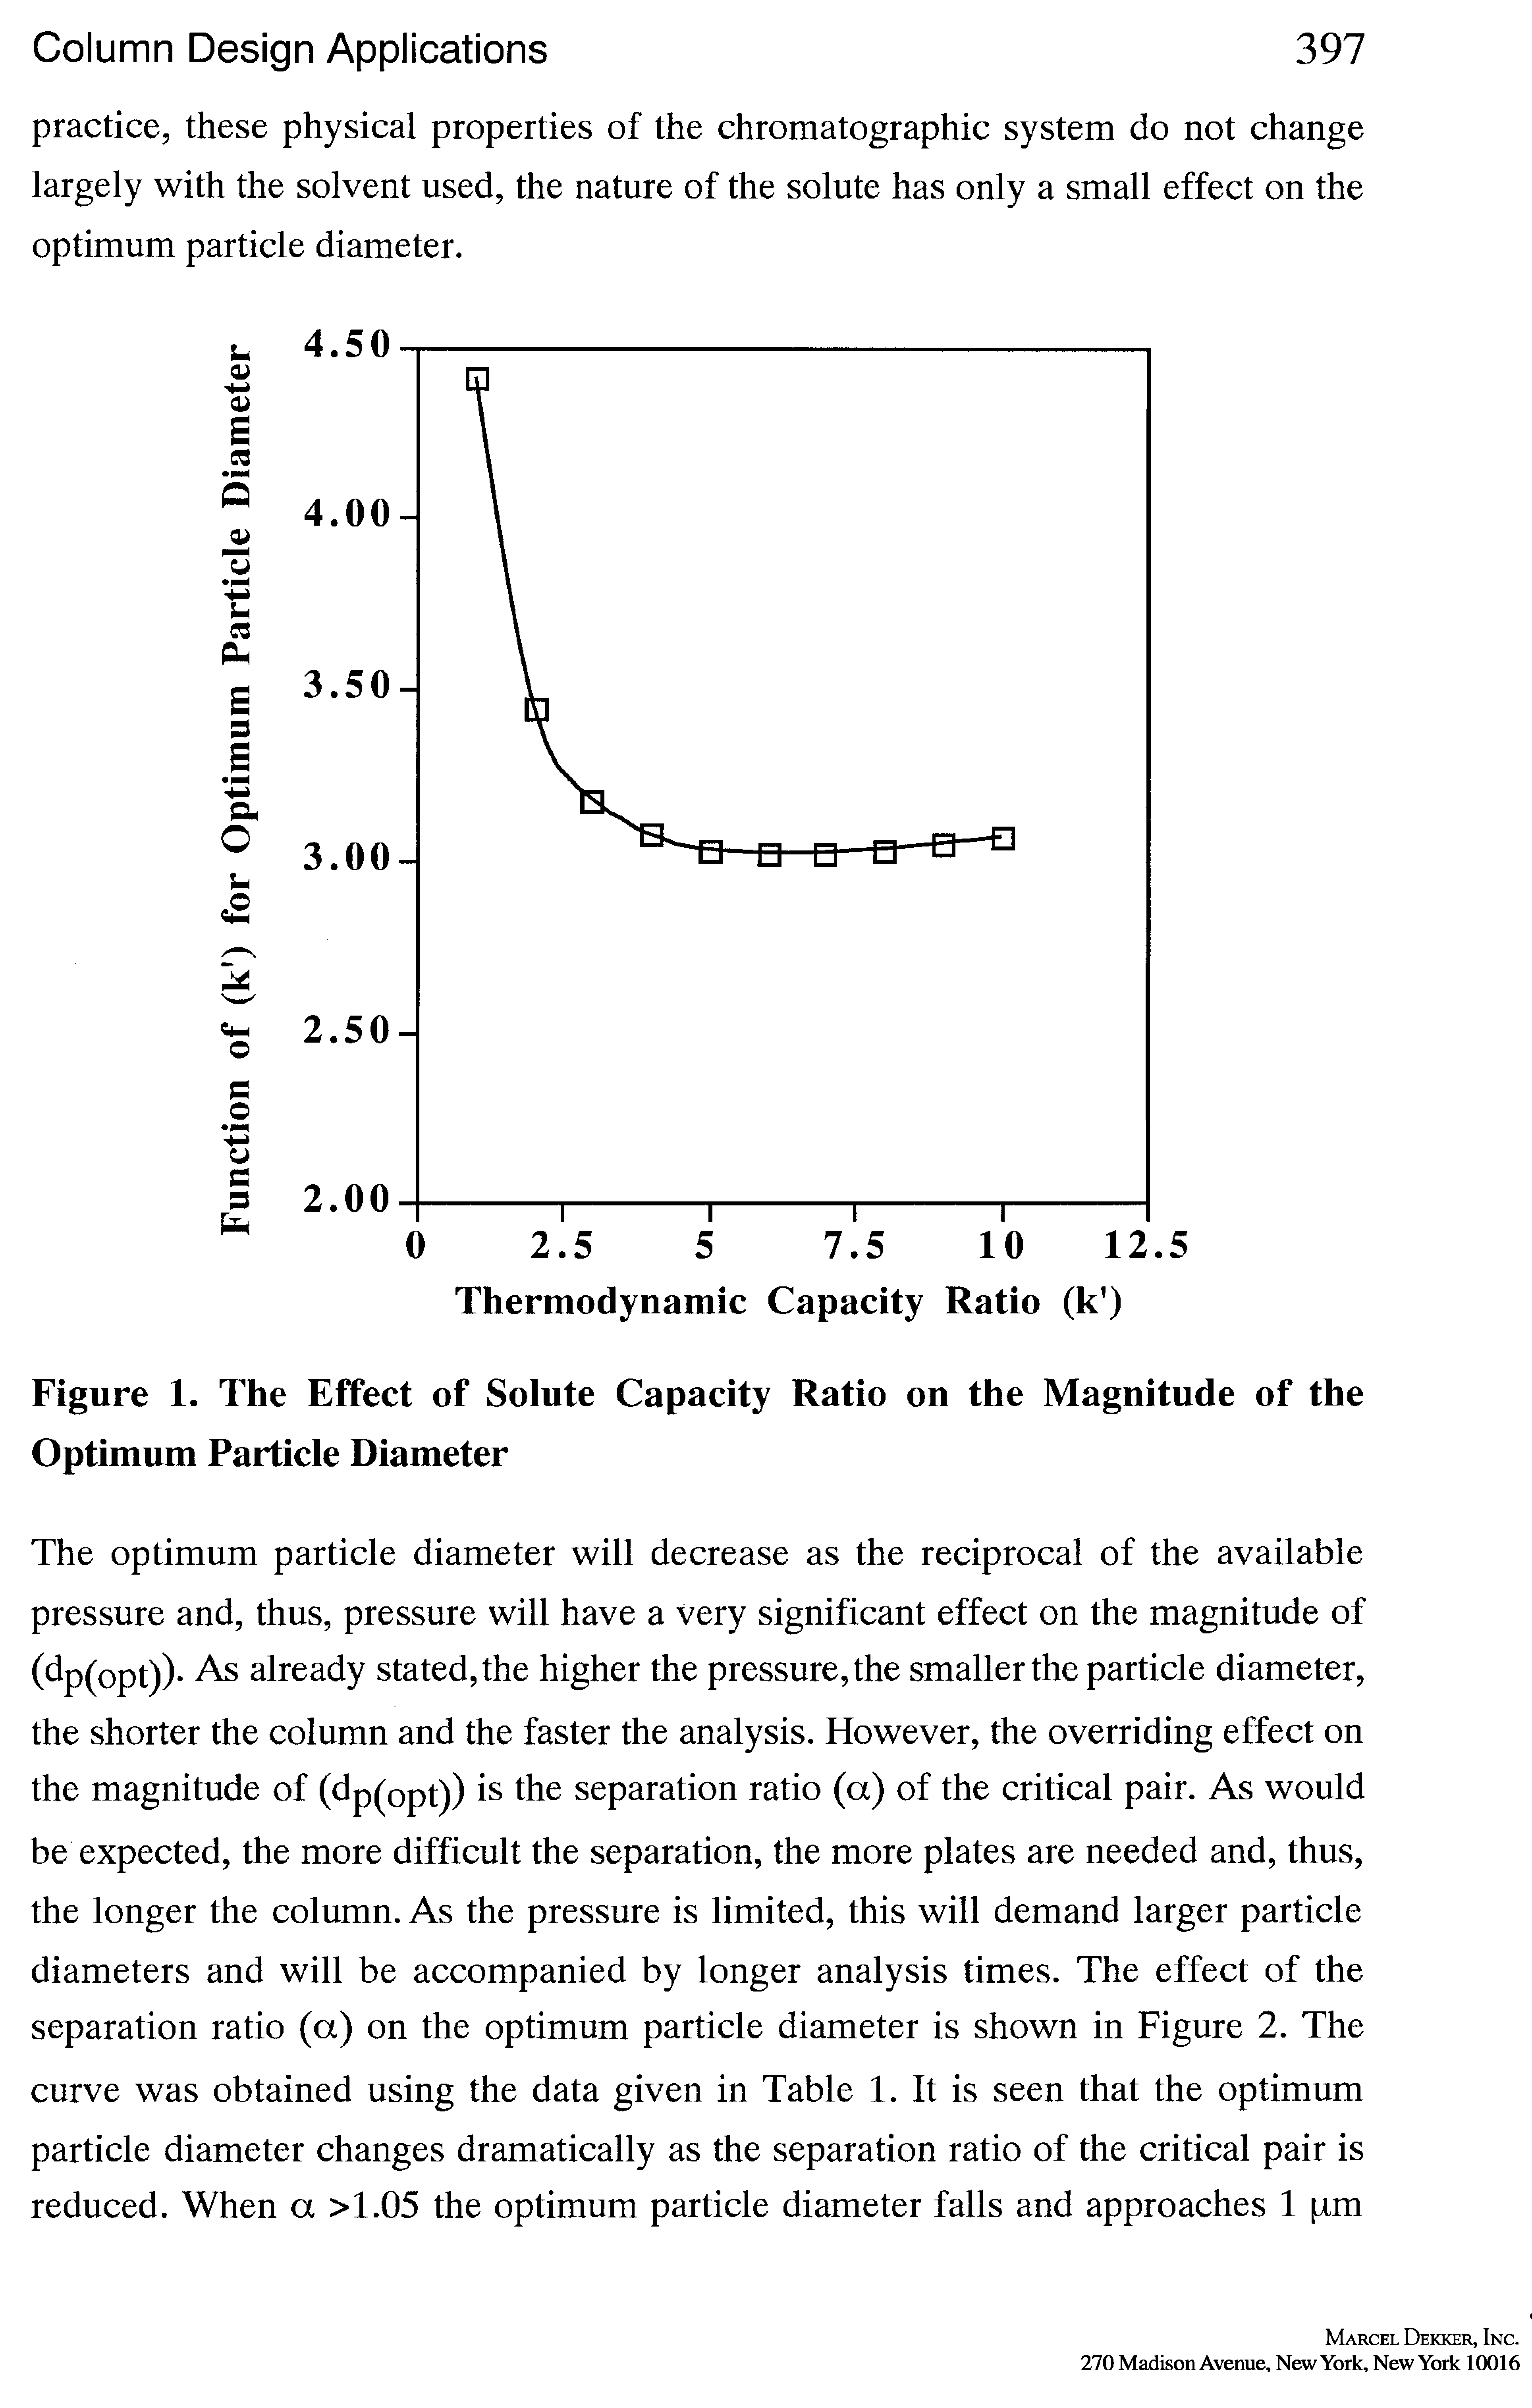 Figure 1. The Effect of Solute Capacity Ratio on the Magnitude of the Optimum Particle Diameter...